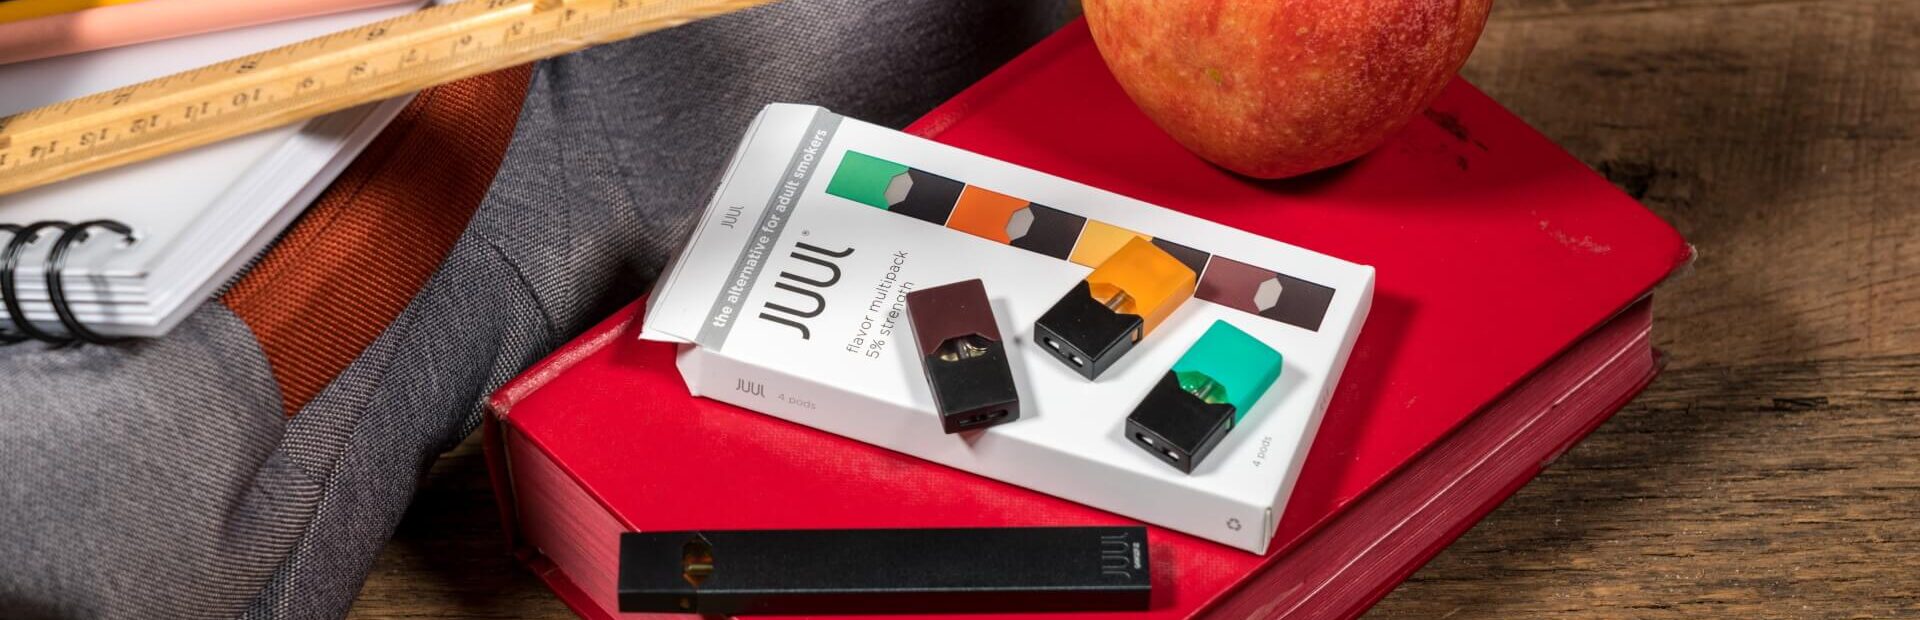 JUUL Vaping devices; youth addiction Lawsuit